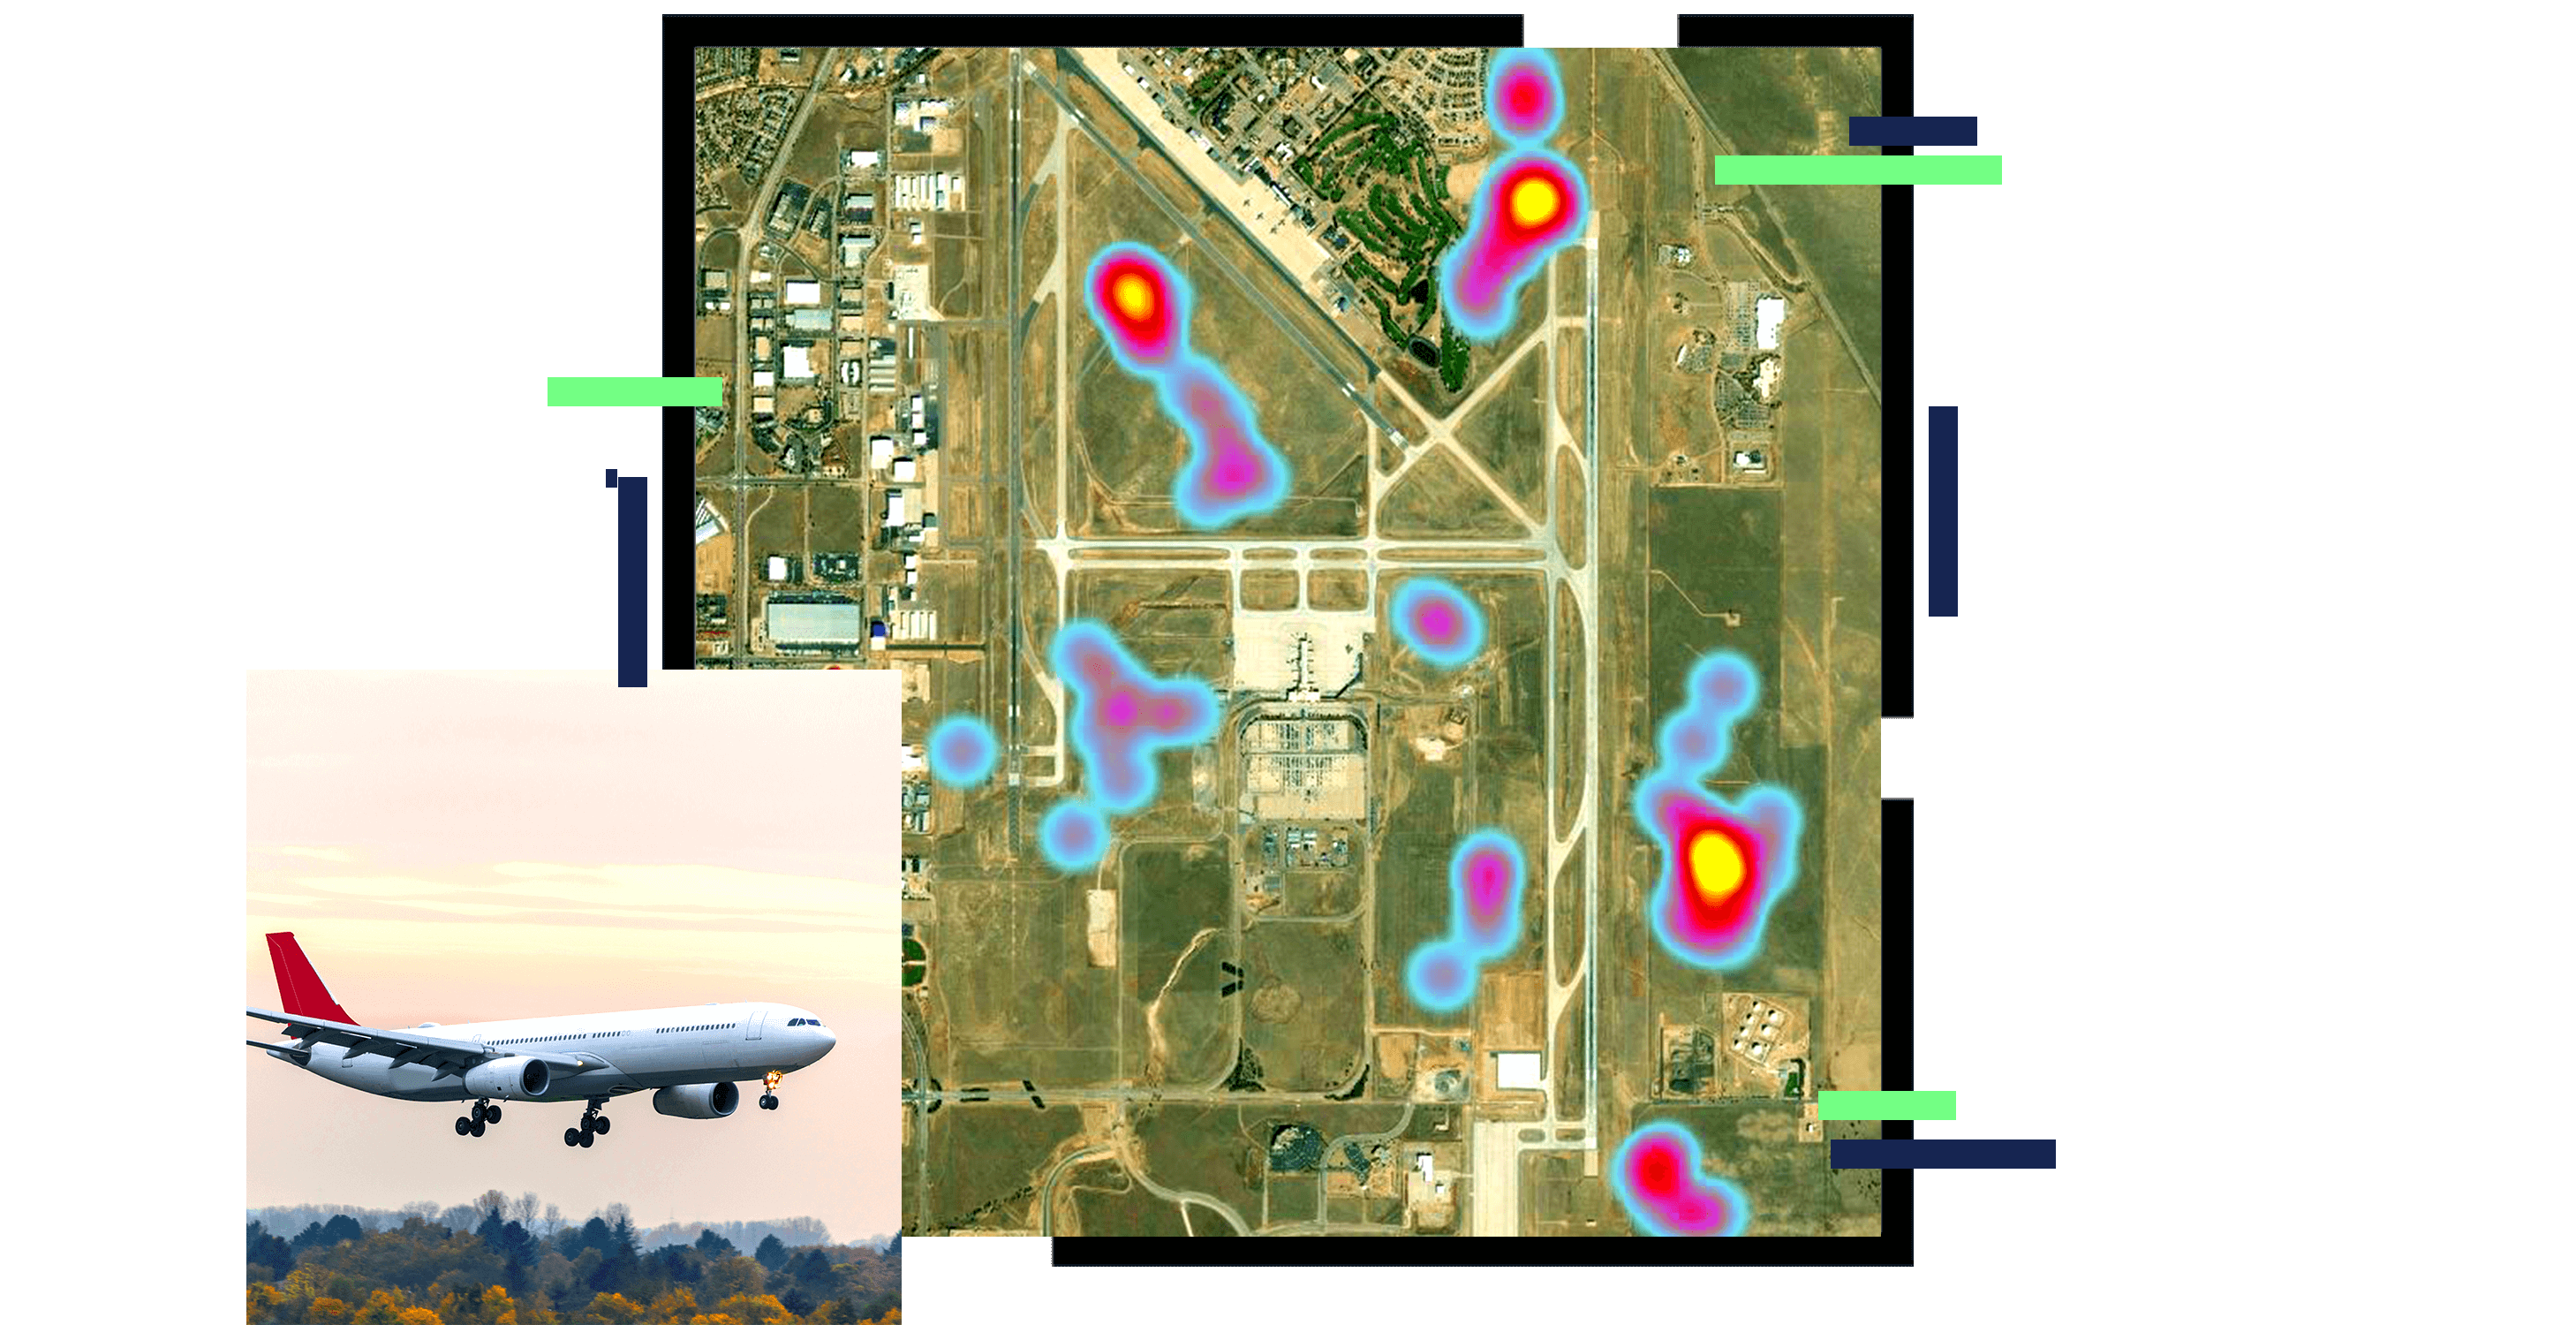 A heat map in red and blue on a satellite image of a pale green rural area, overlaid with a photo of an airplane in flight